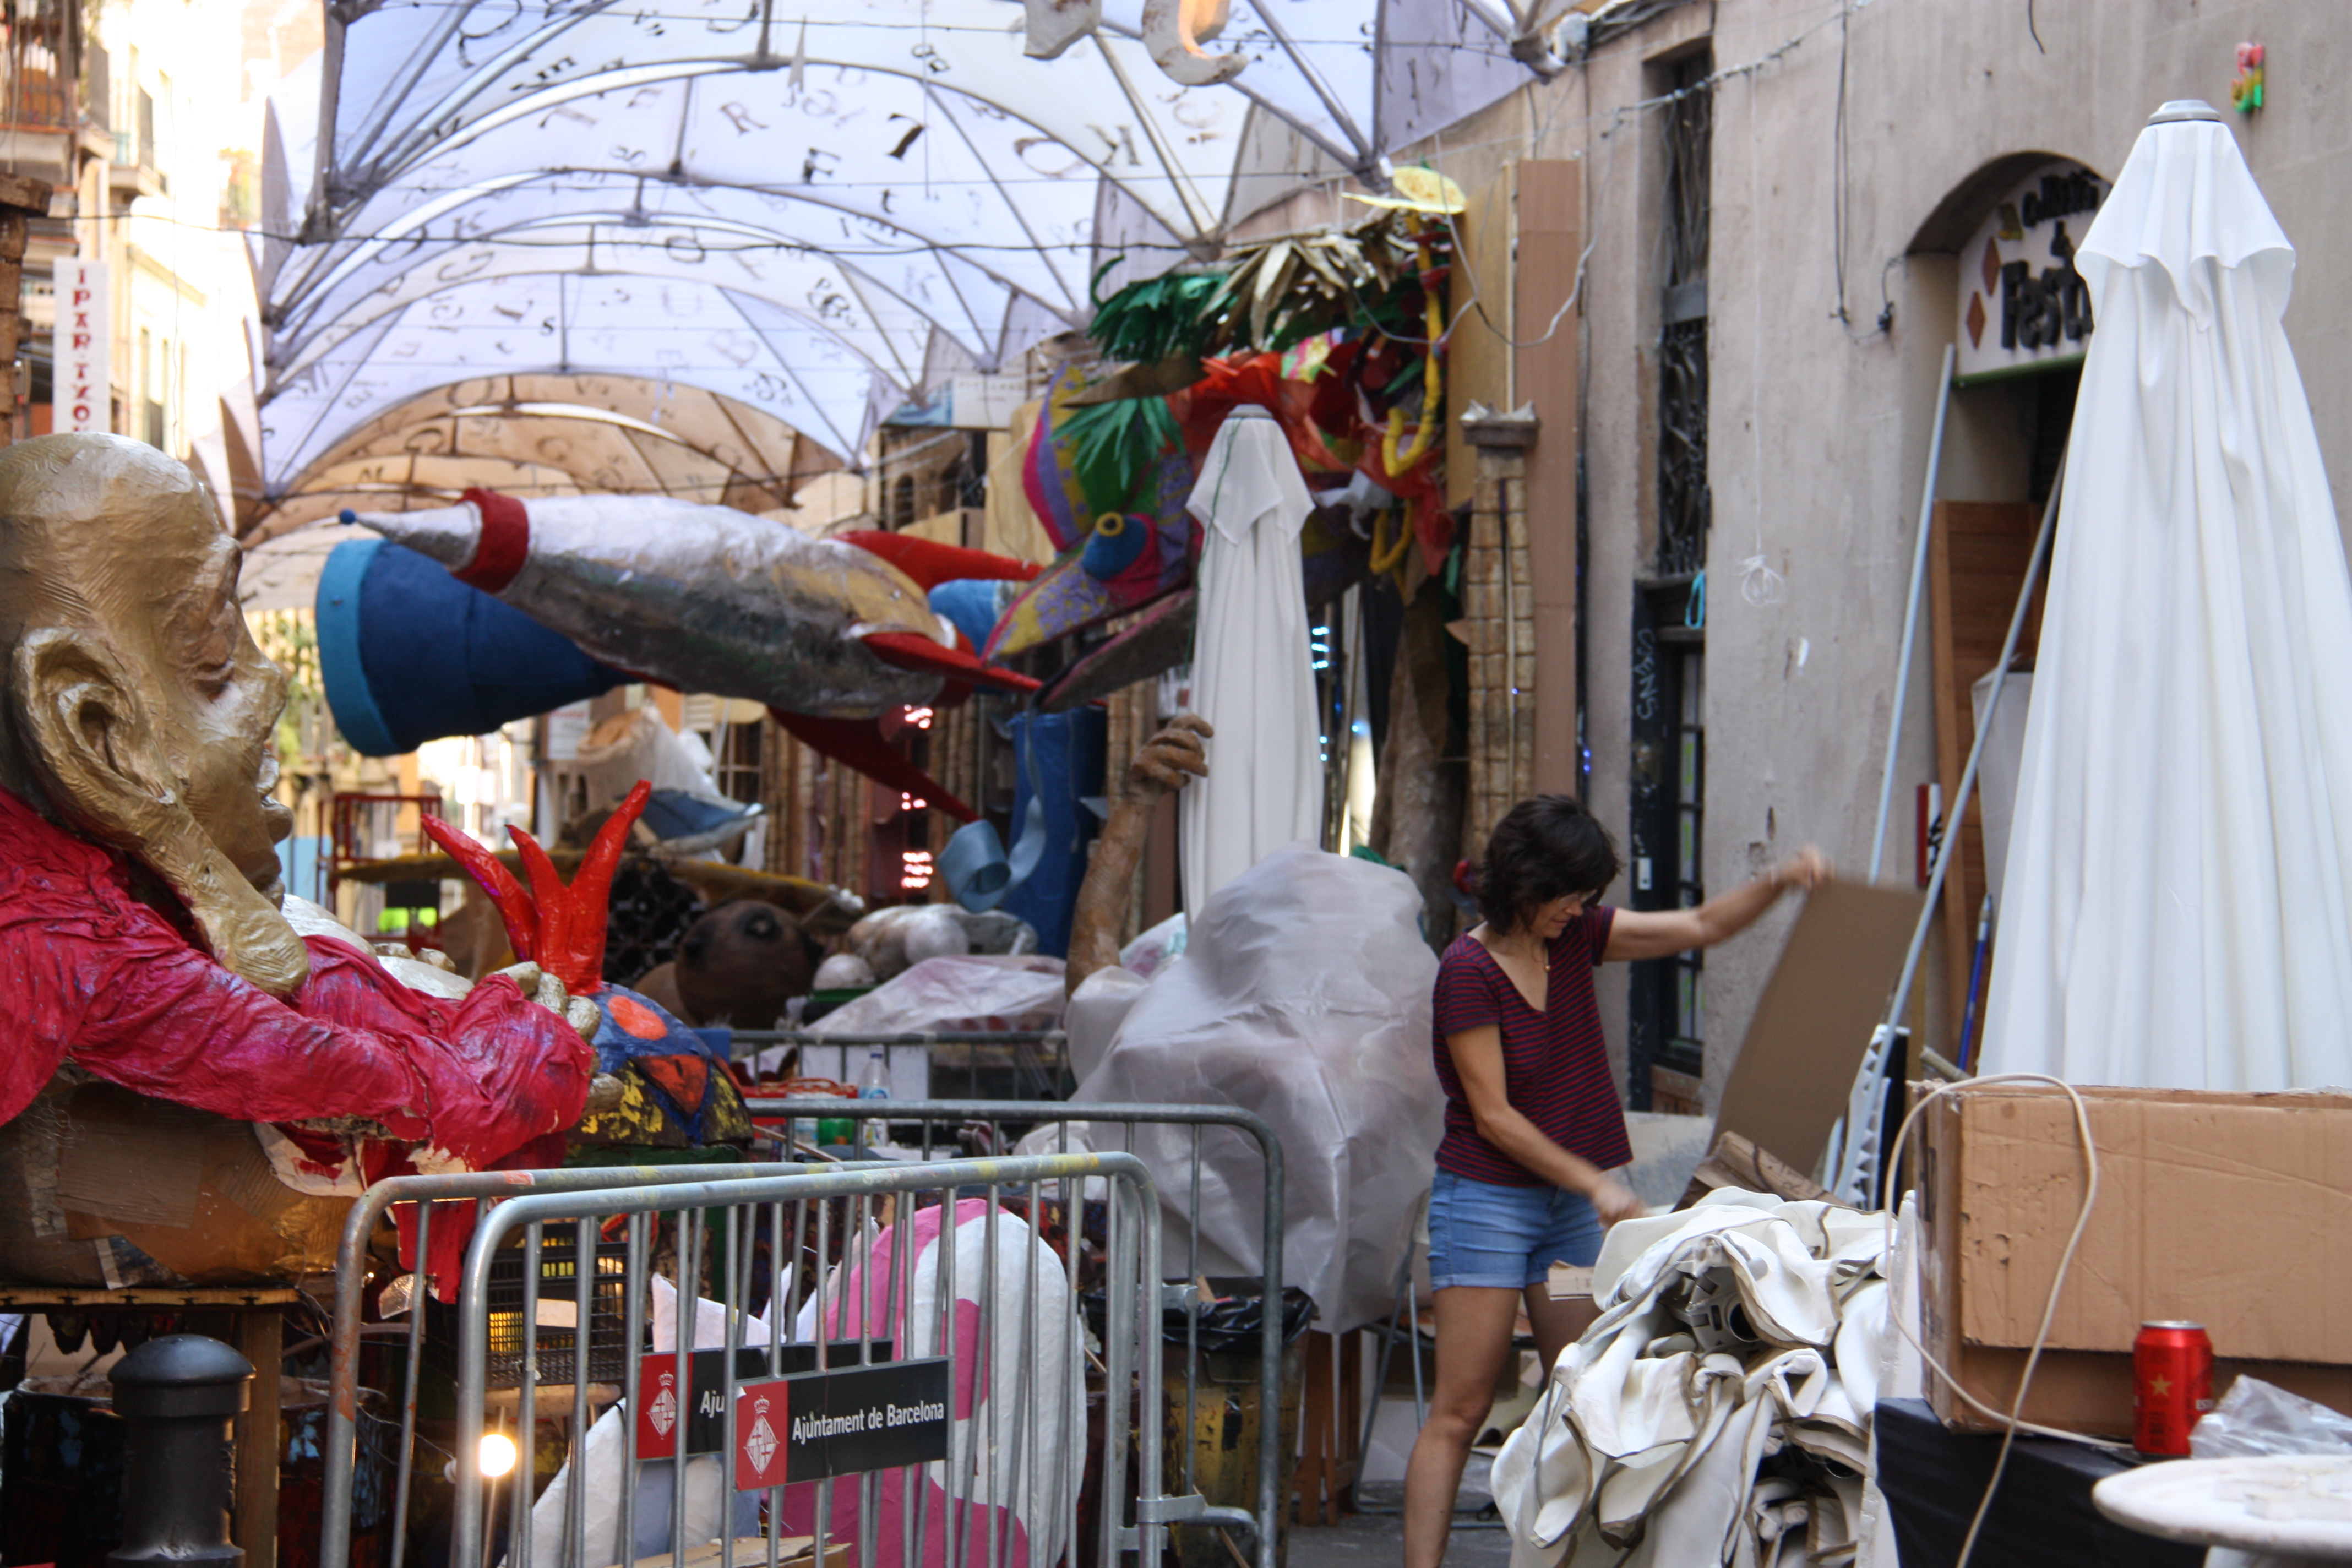 Preparations for the Gràcia festival have been underway for weeks (Ariana Coma)